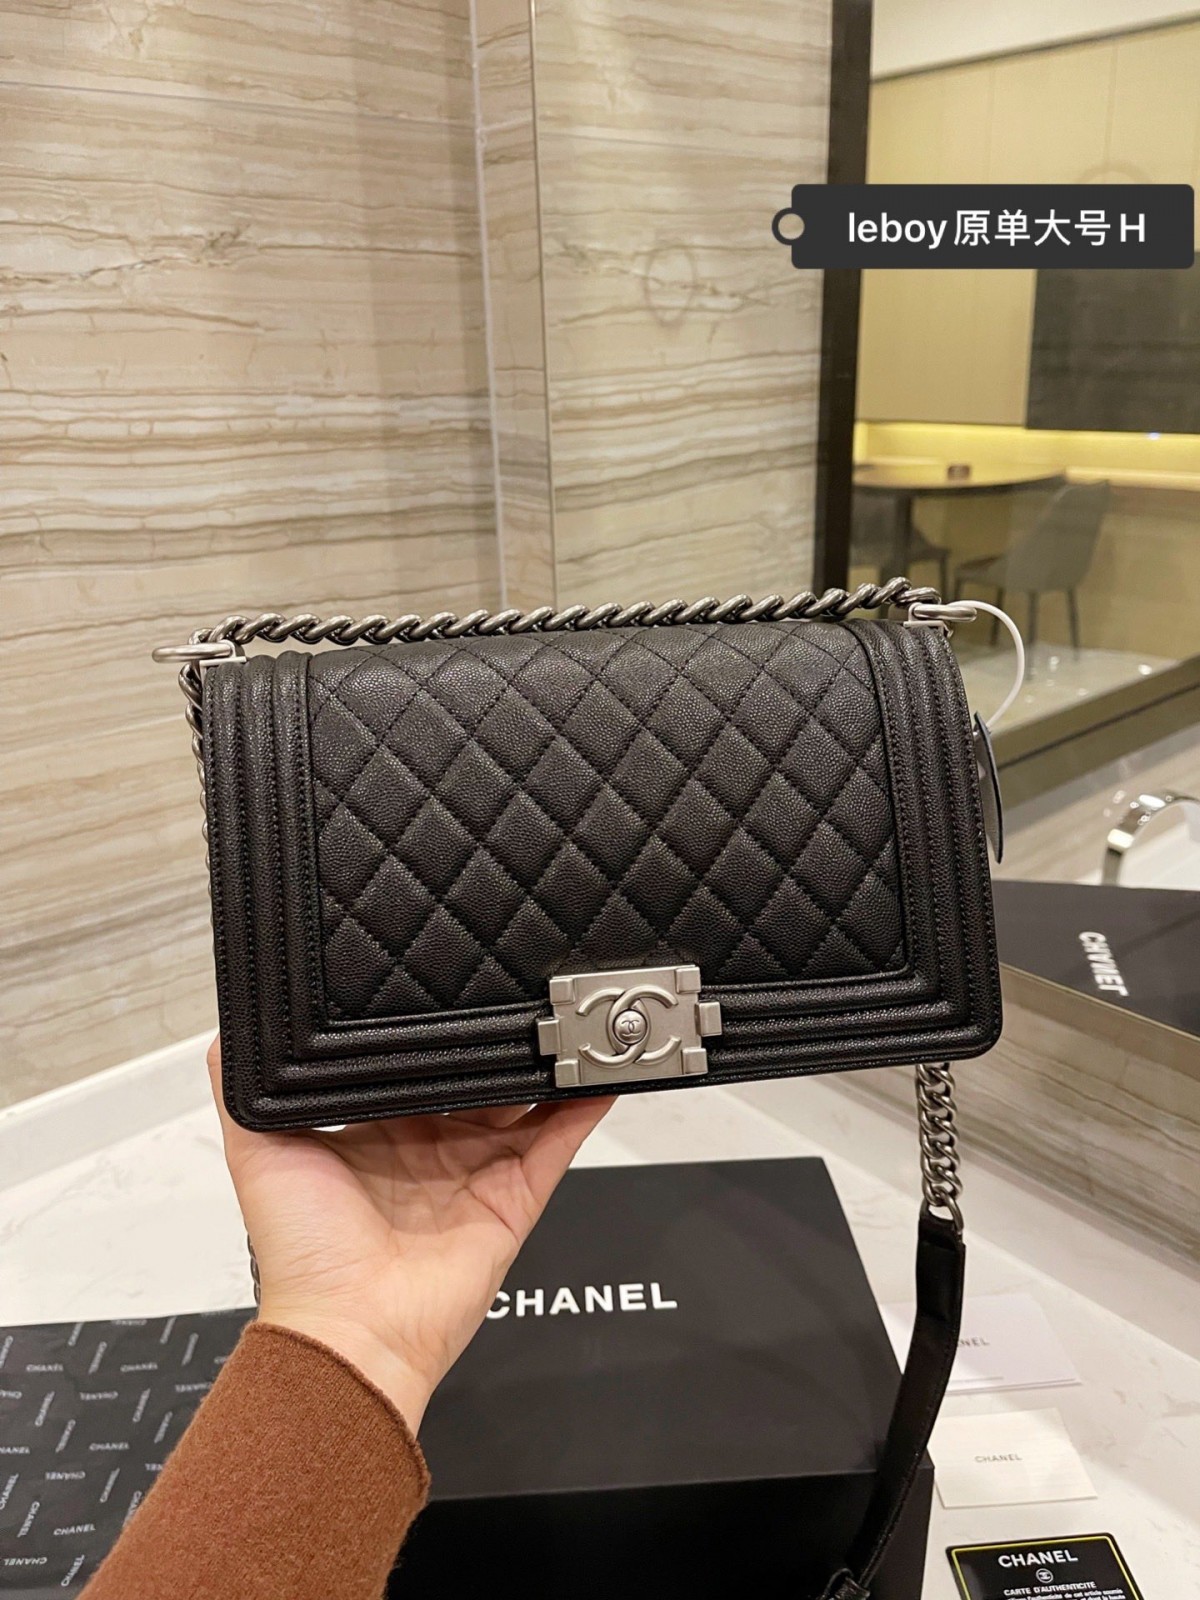 One of the coolest replica bags: Chanel Leboy (2022 Updated)-Best Quality Fake designer Bag Review, Replica designer bag ru